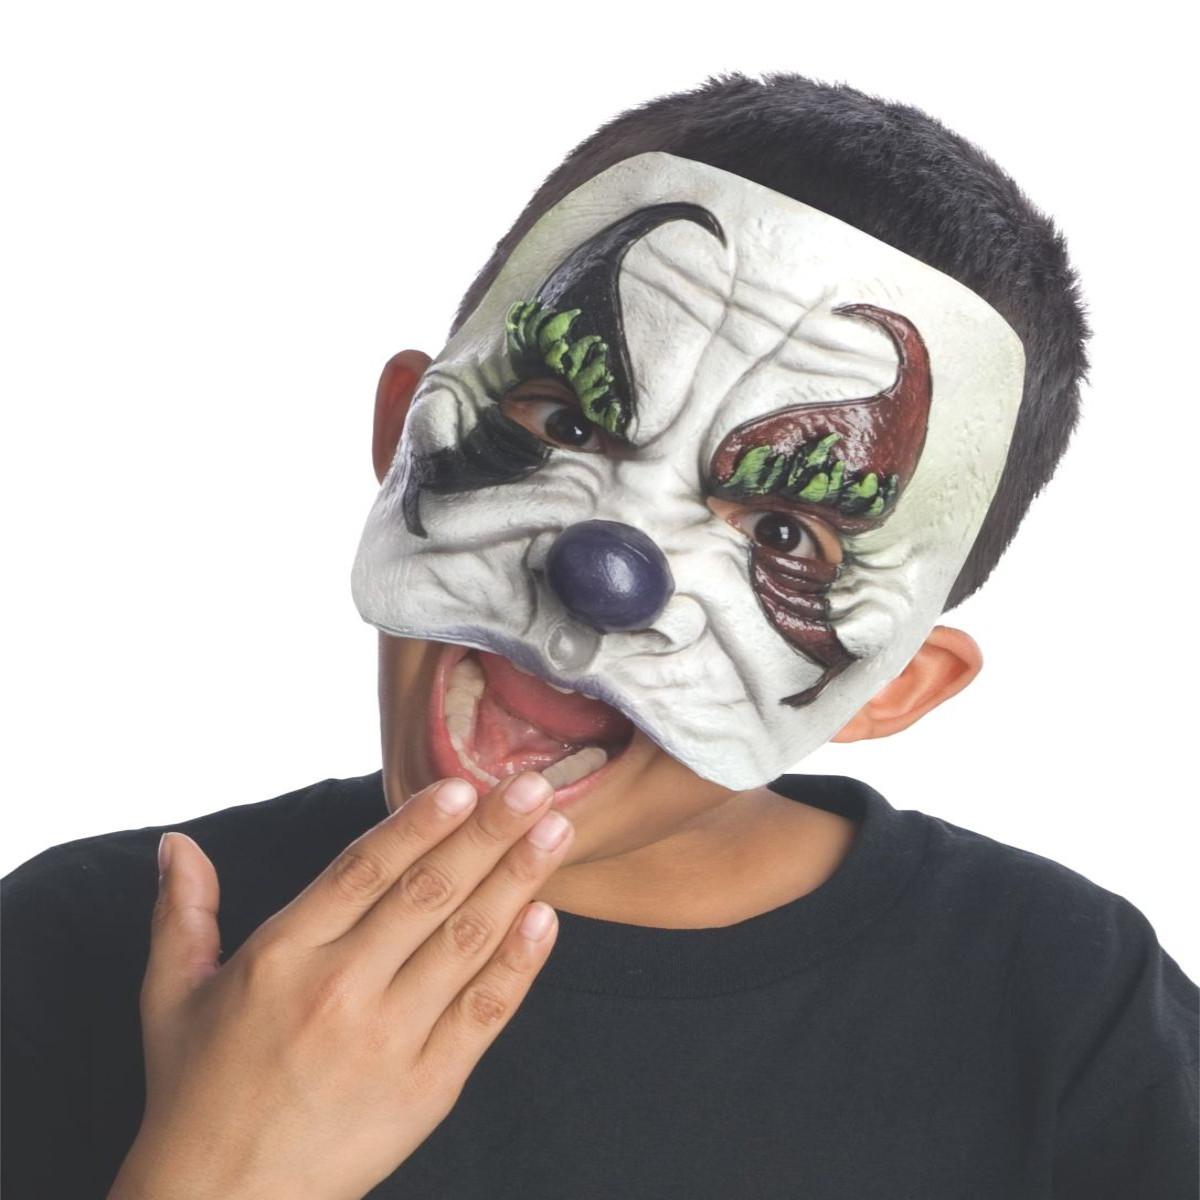 Giggles Chinless Mask Costumes & Apparel - Party Centre